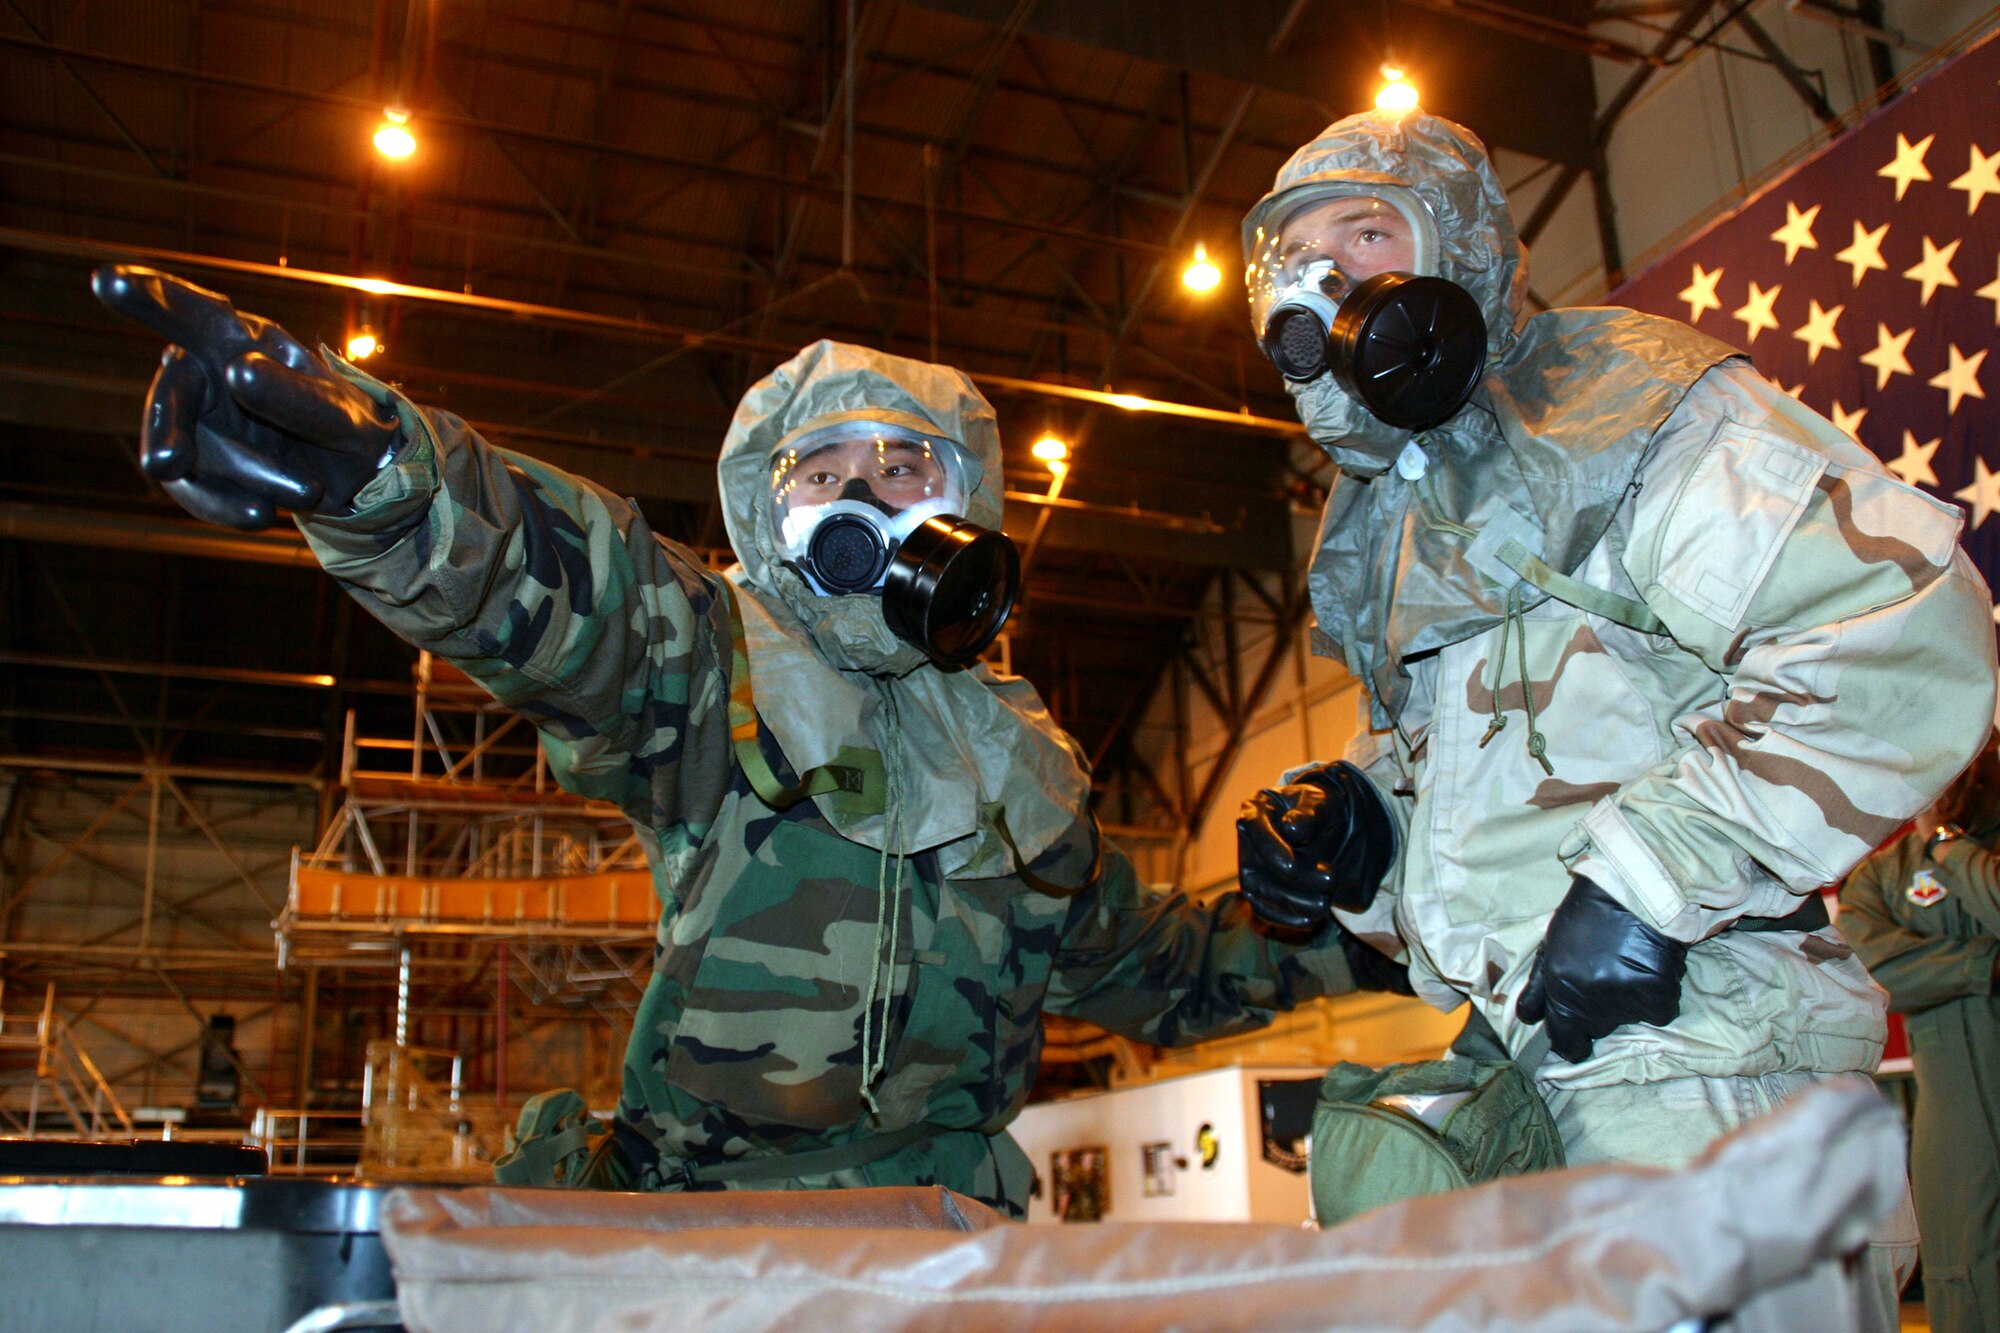 Airman 1st Class Chris Reyburn and Airman Christian Sousa, 552nd Air Maintenance Squadron, ensure they perform all required tasks while going through a chemical decontamination line during the ATSO (Ability to Survive and Operate) Rodeo challenge July 13. (Photo by Senior Airman Lorraine Amaro)